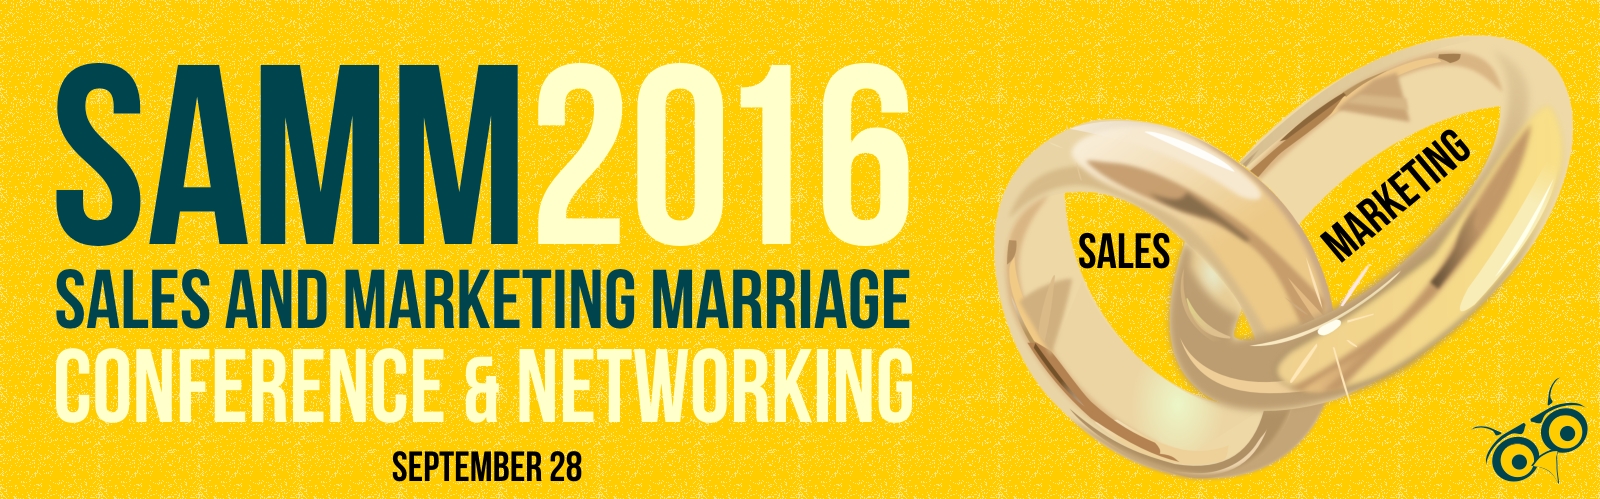 SaMM 2016 Conference _ Networking